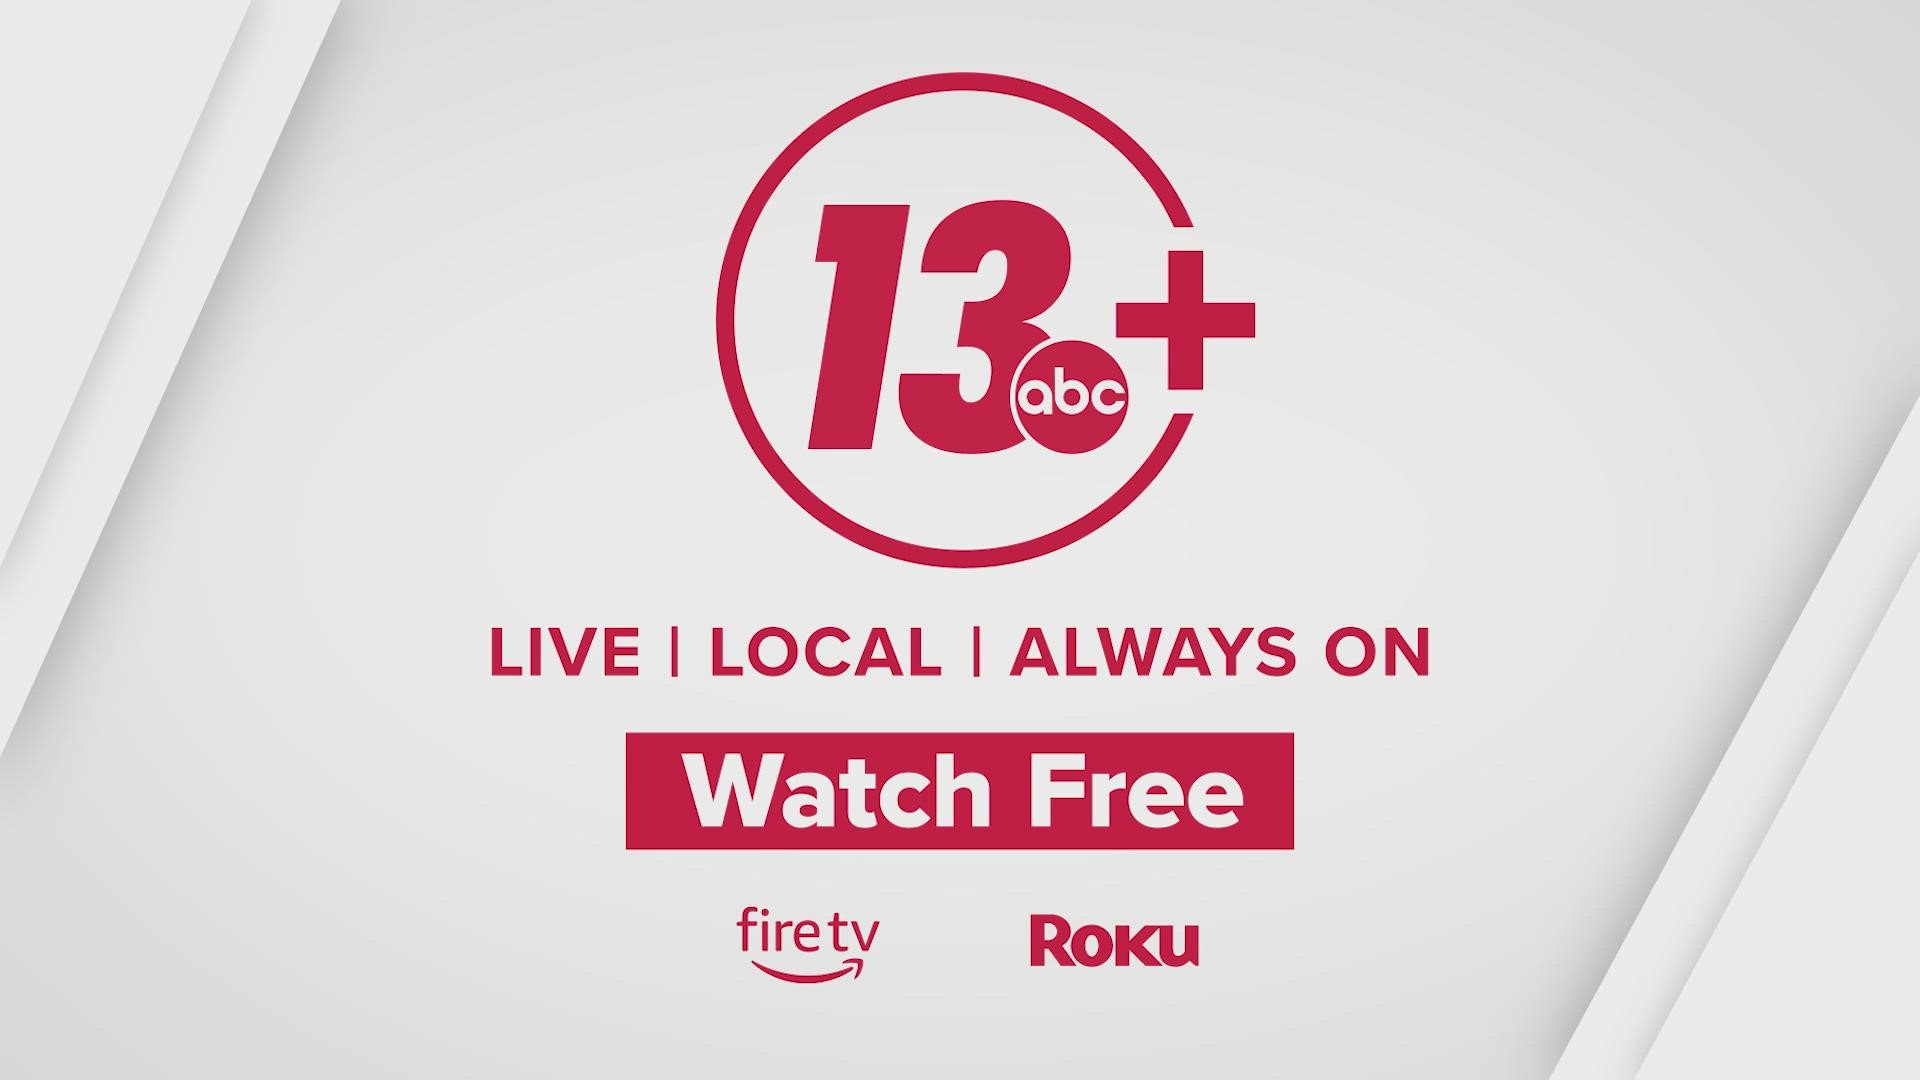 See how to watch 13+ for free on Roku and Fire TV with help from our Morning Anchor, Meredith TerHaar.